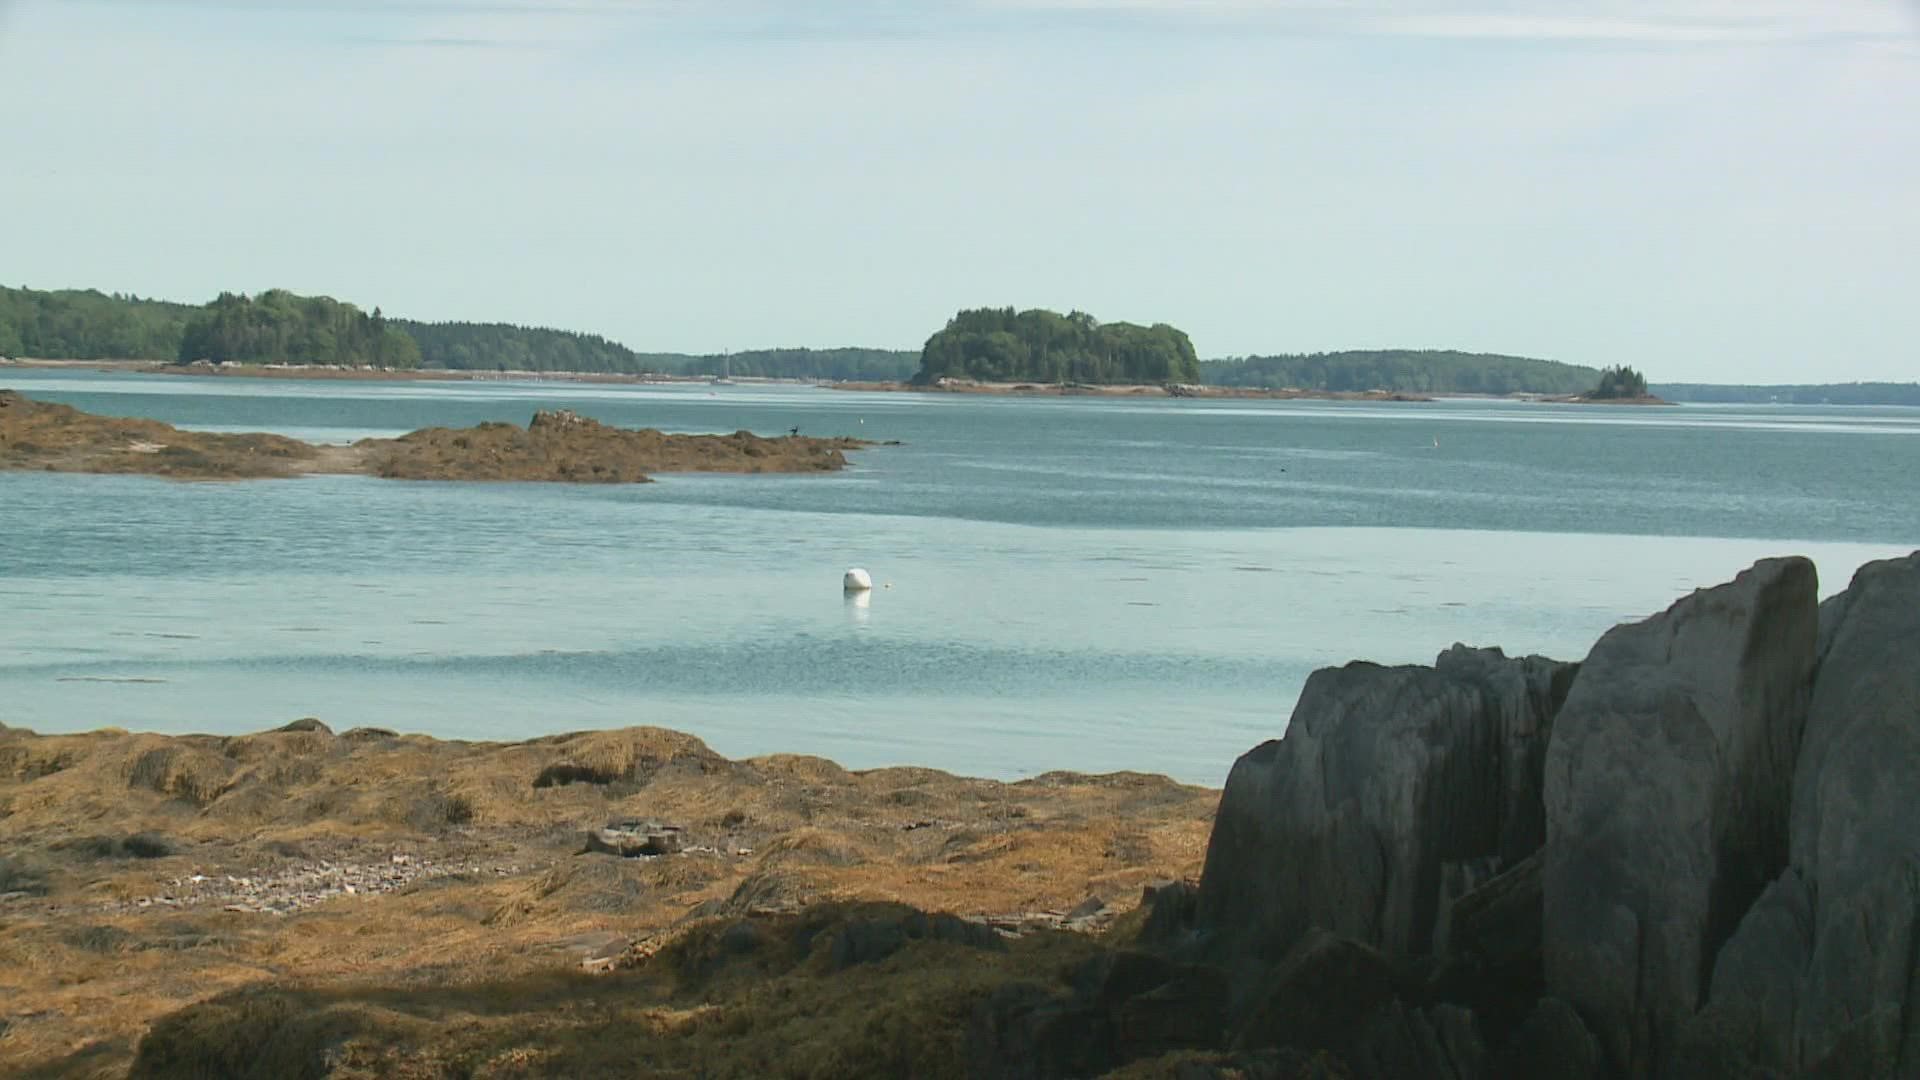 A couple miles off of Casco Bay, lies 22 acres of undeveloped, uninhabited, and beautiful land.